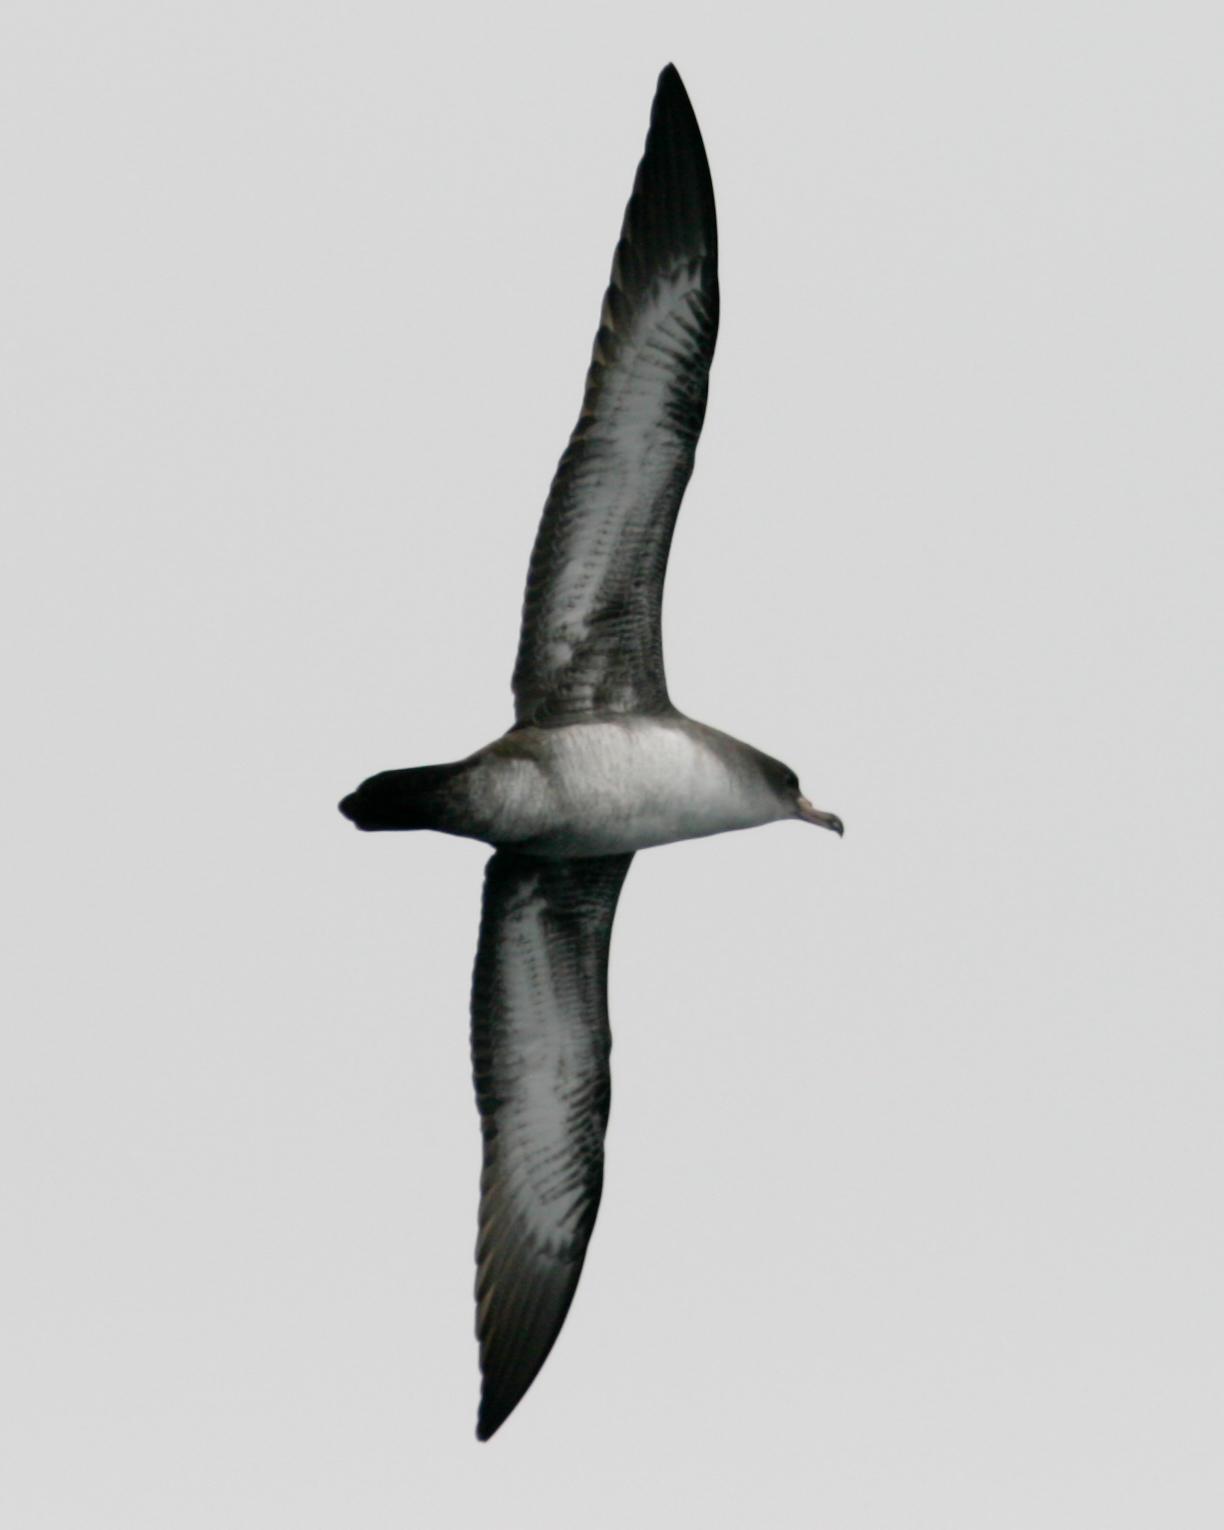 Pink-footed Shearwater Photo by Nathan Renn